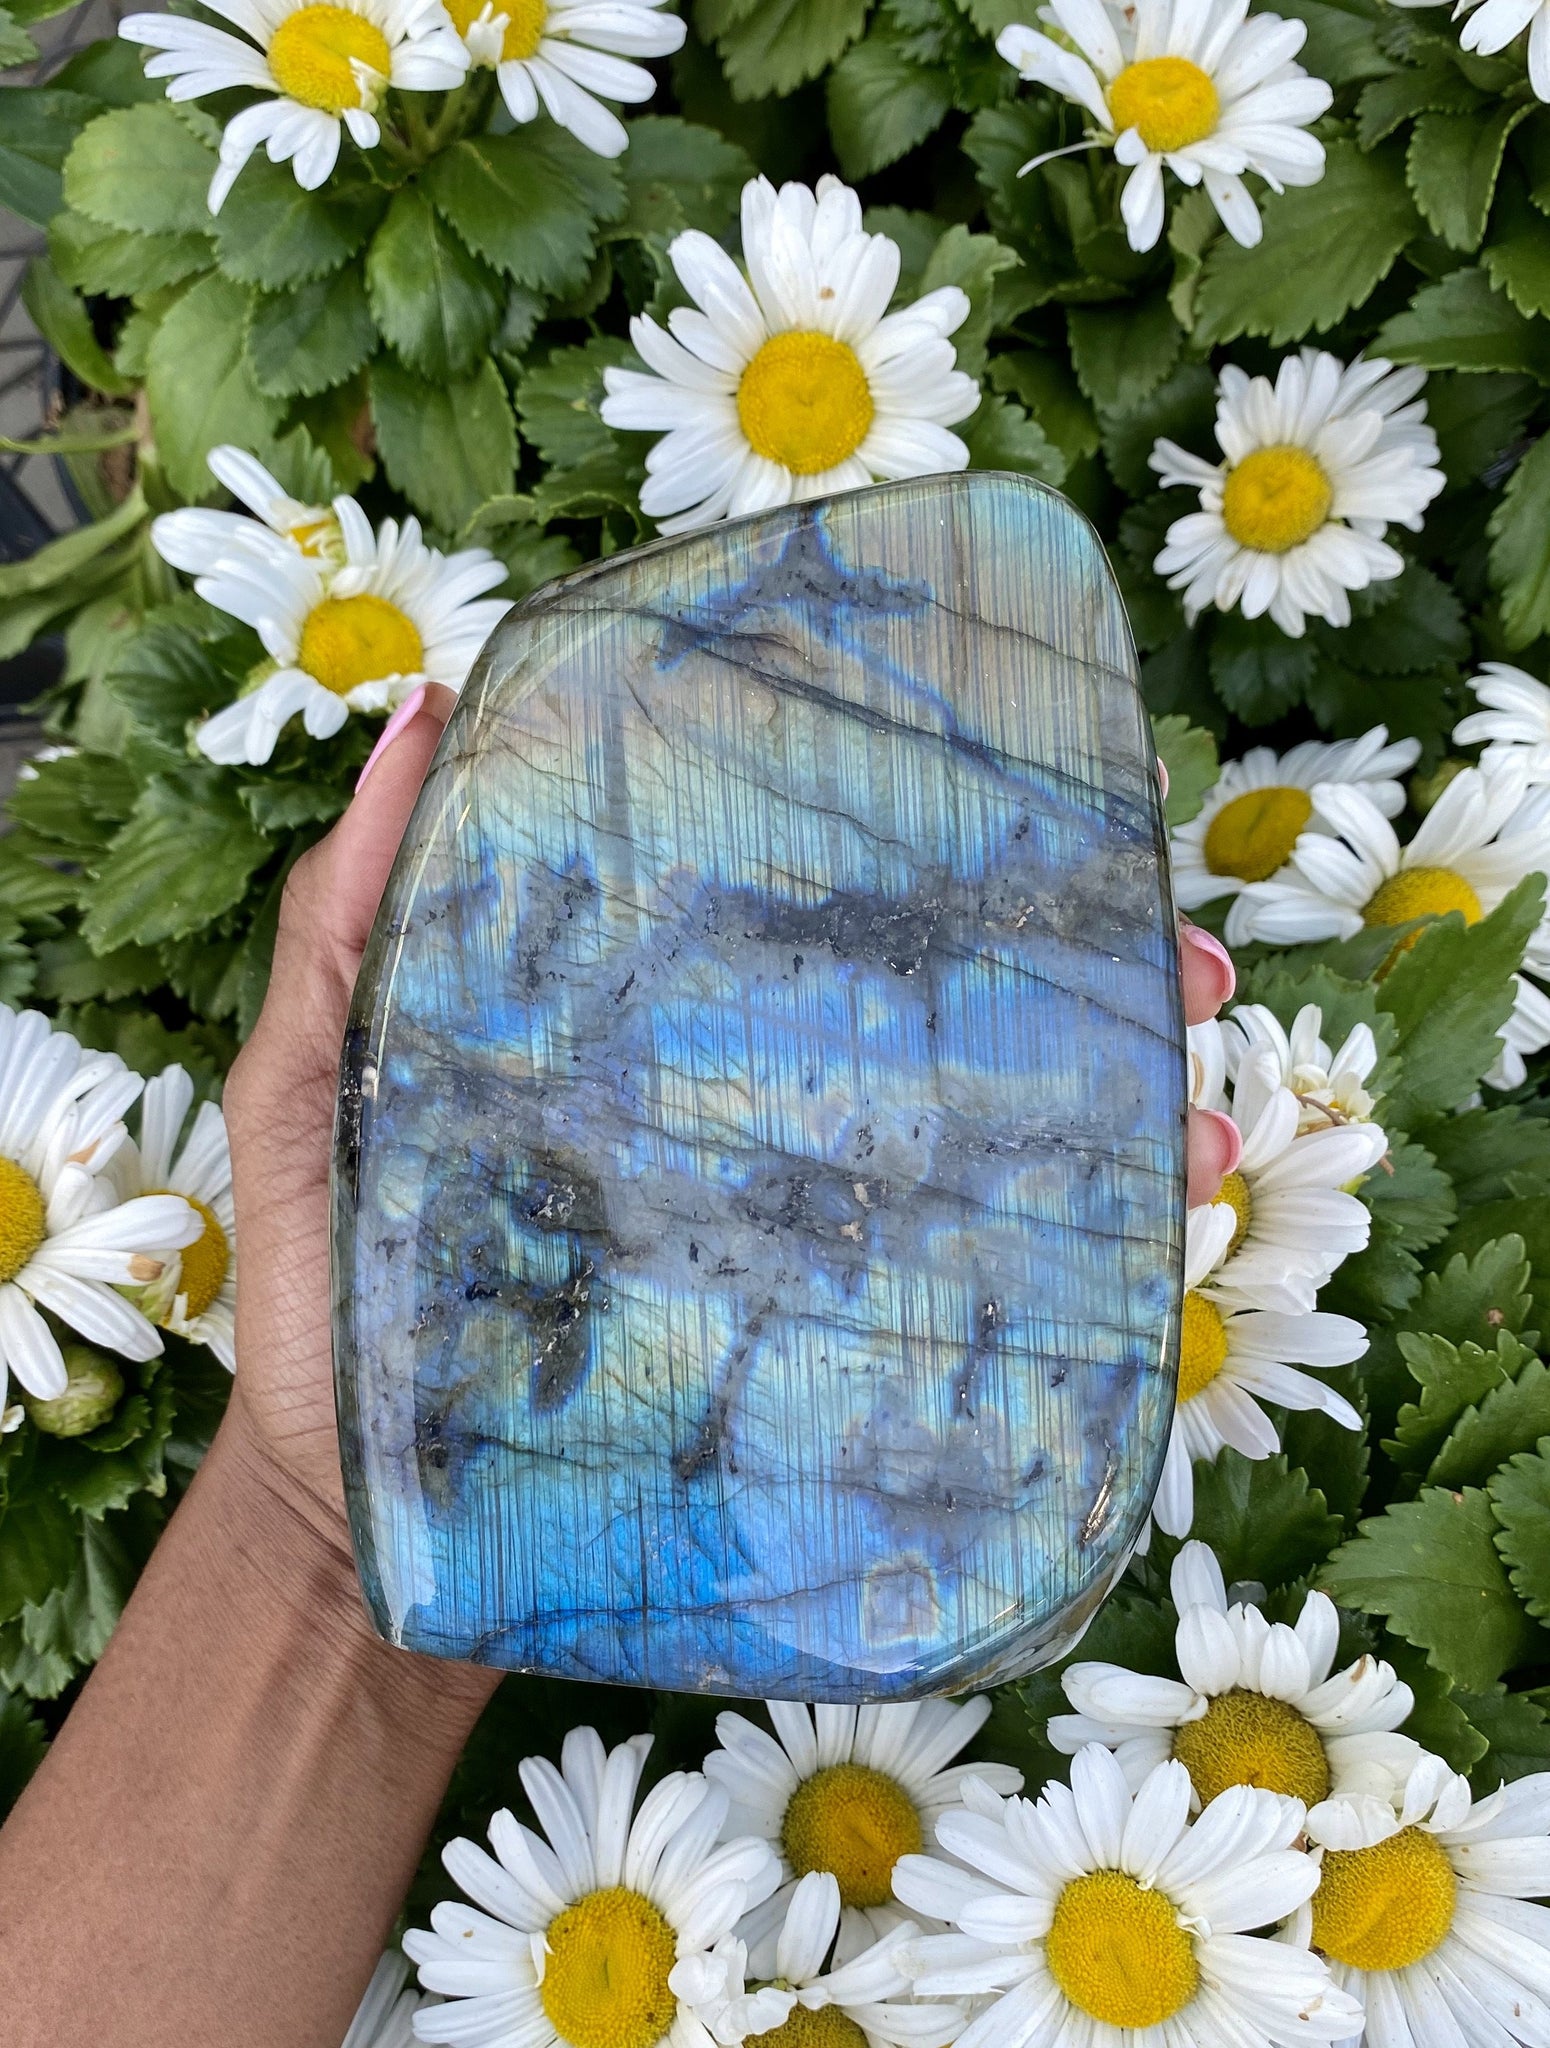 Meditate with Labradorite to connect and receive messages from your ancestors or spirit guides. It is also known to heighten your psychic awareness and boost your spiritual growth. Labradorite is very protective, banishing negative energies.